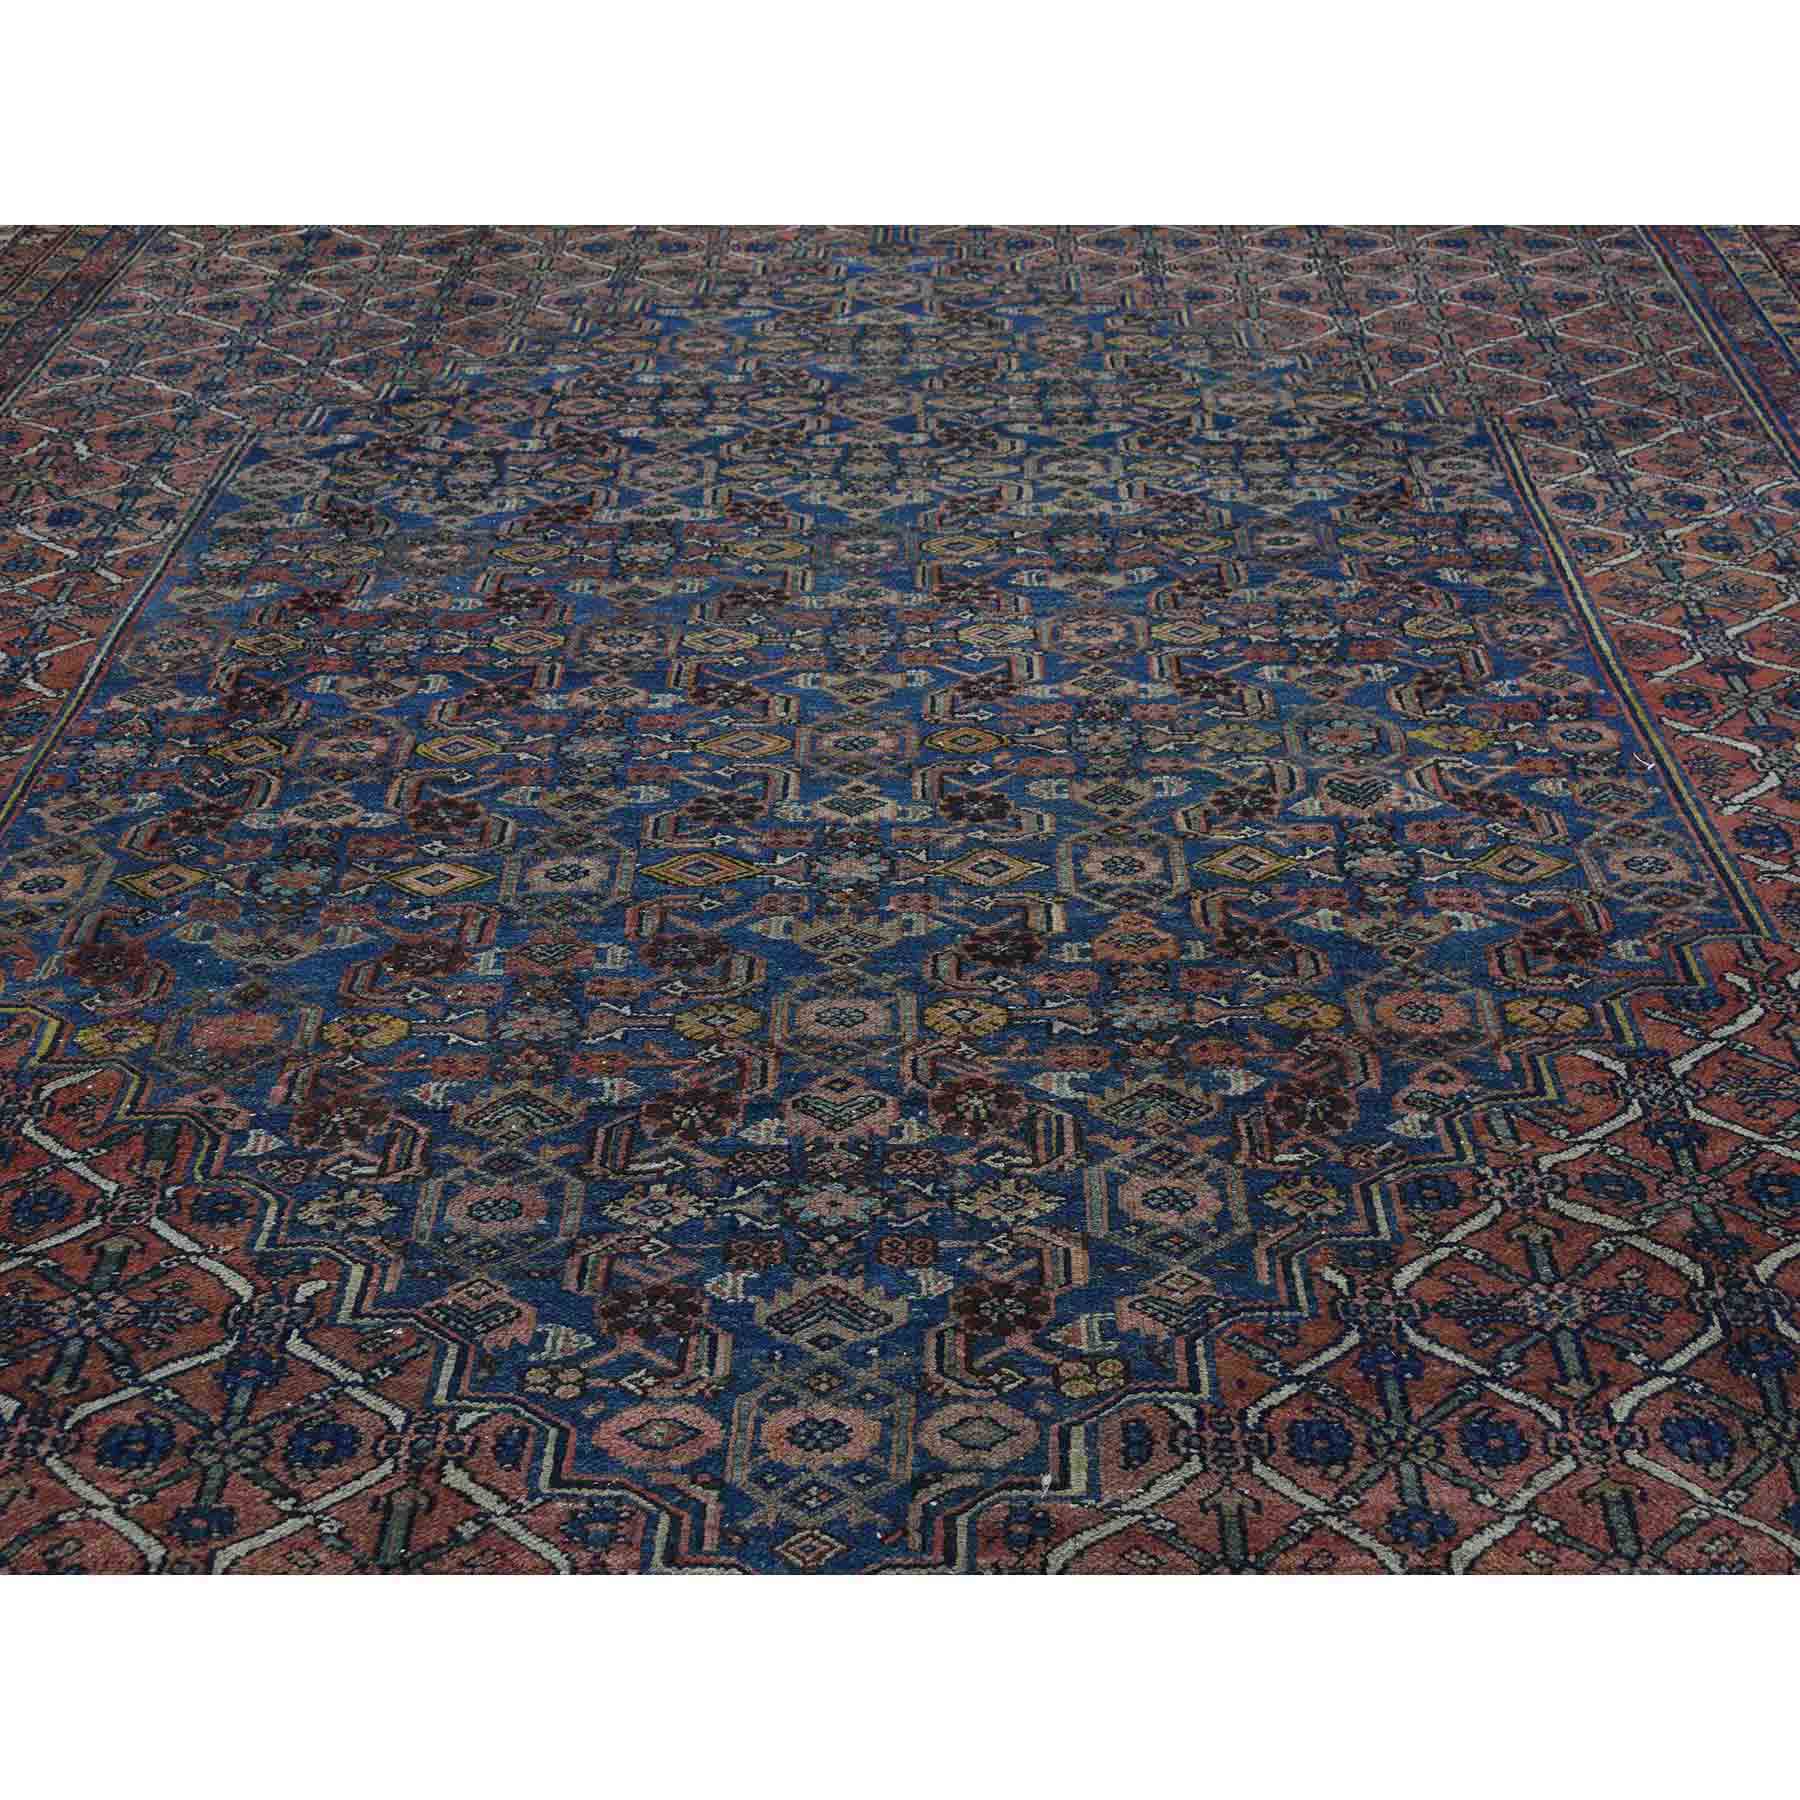 Antique-Hand-Knotted-Rug-179750